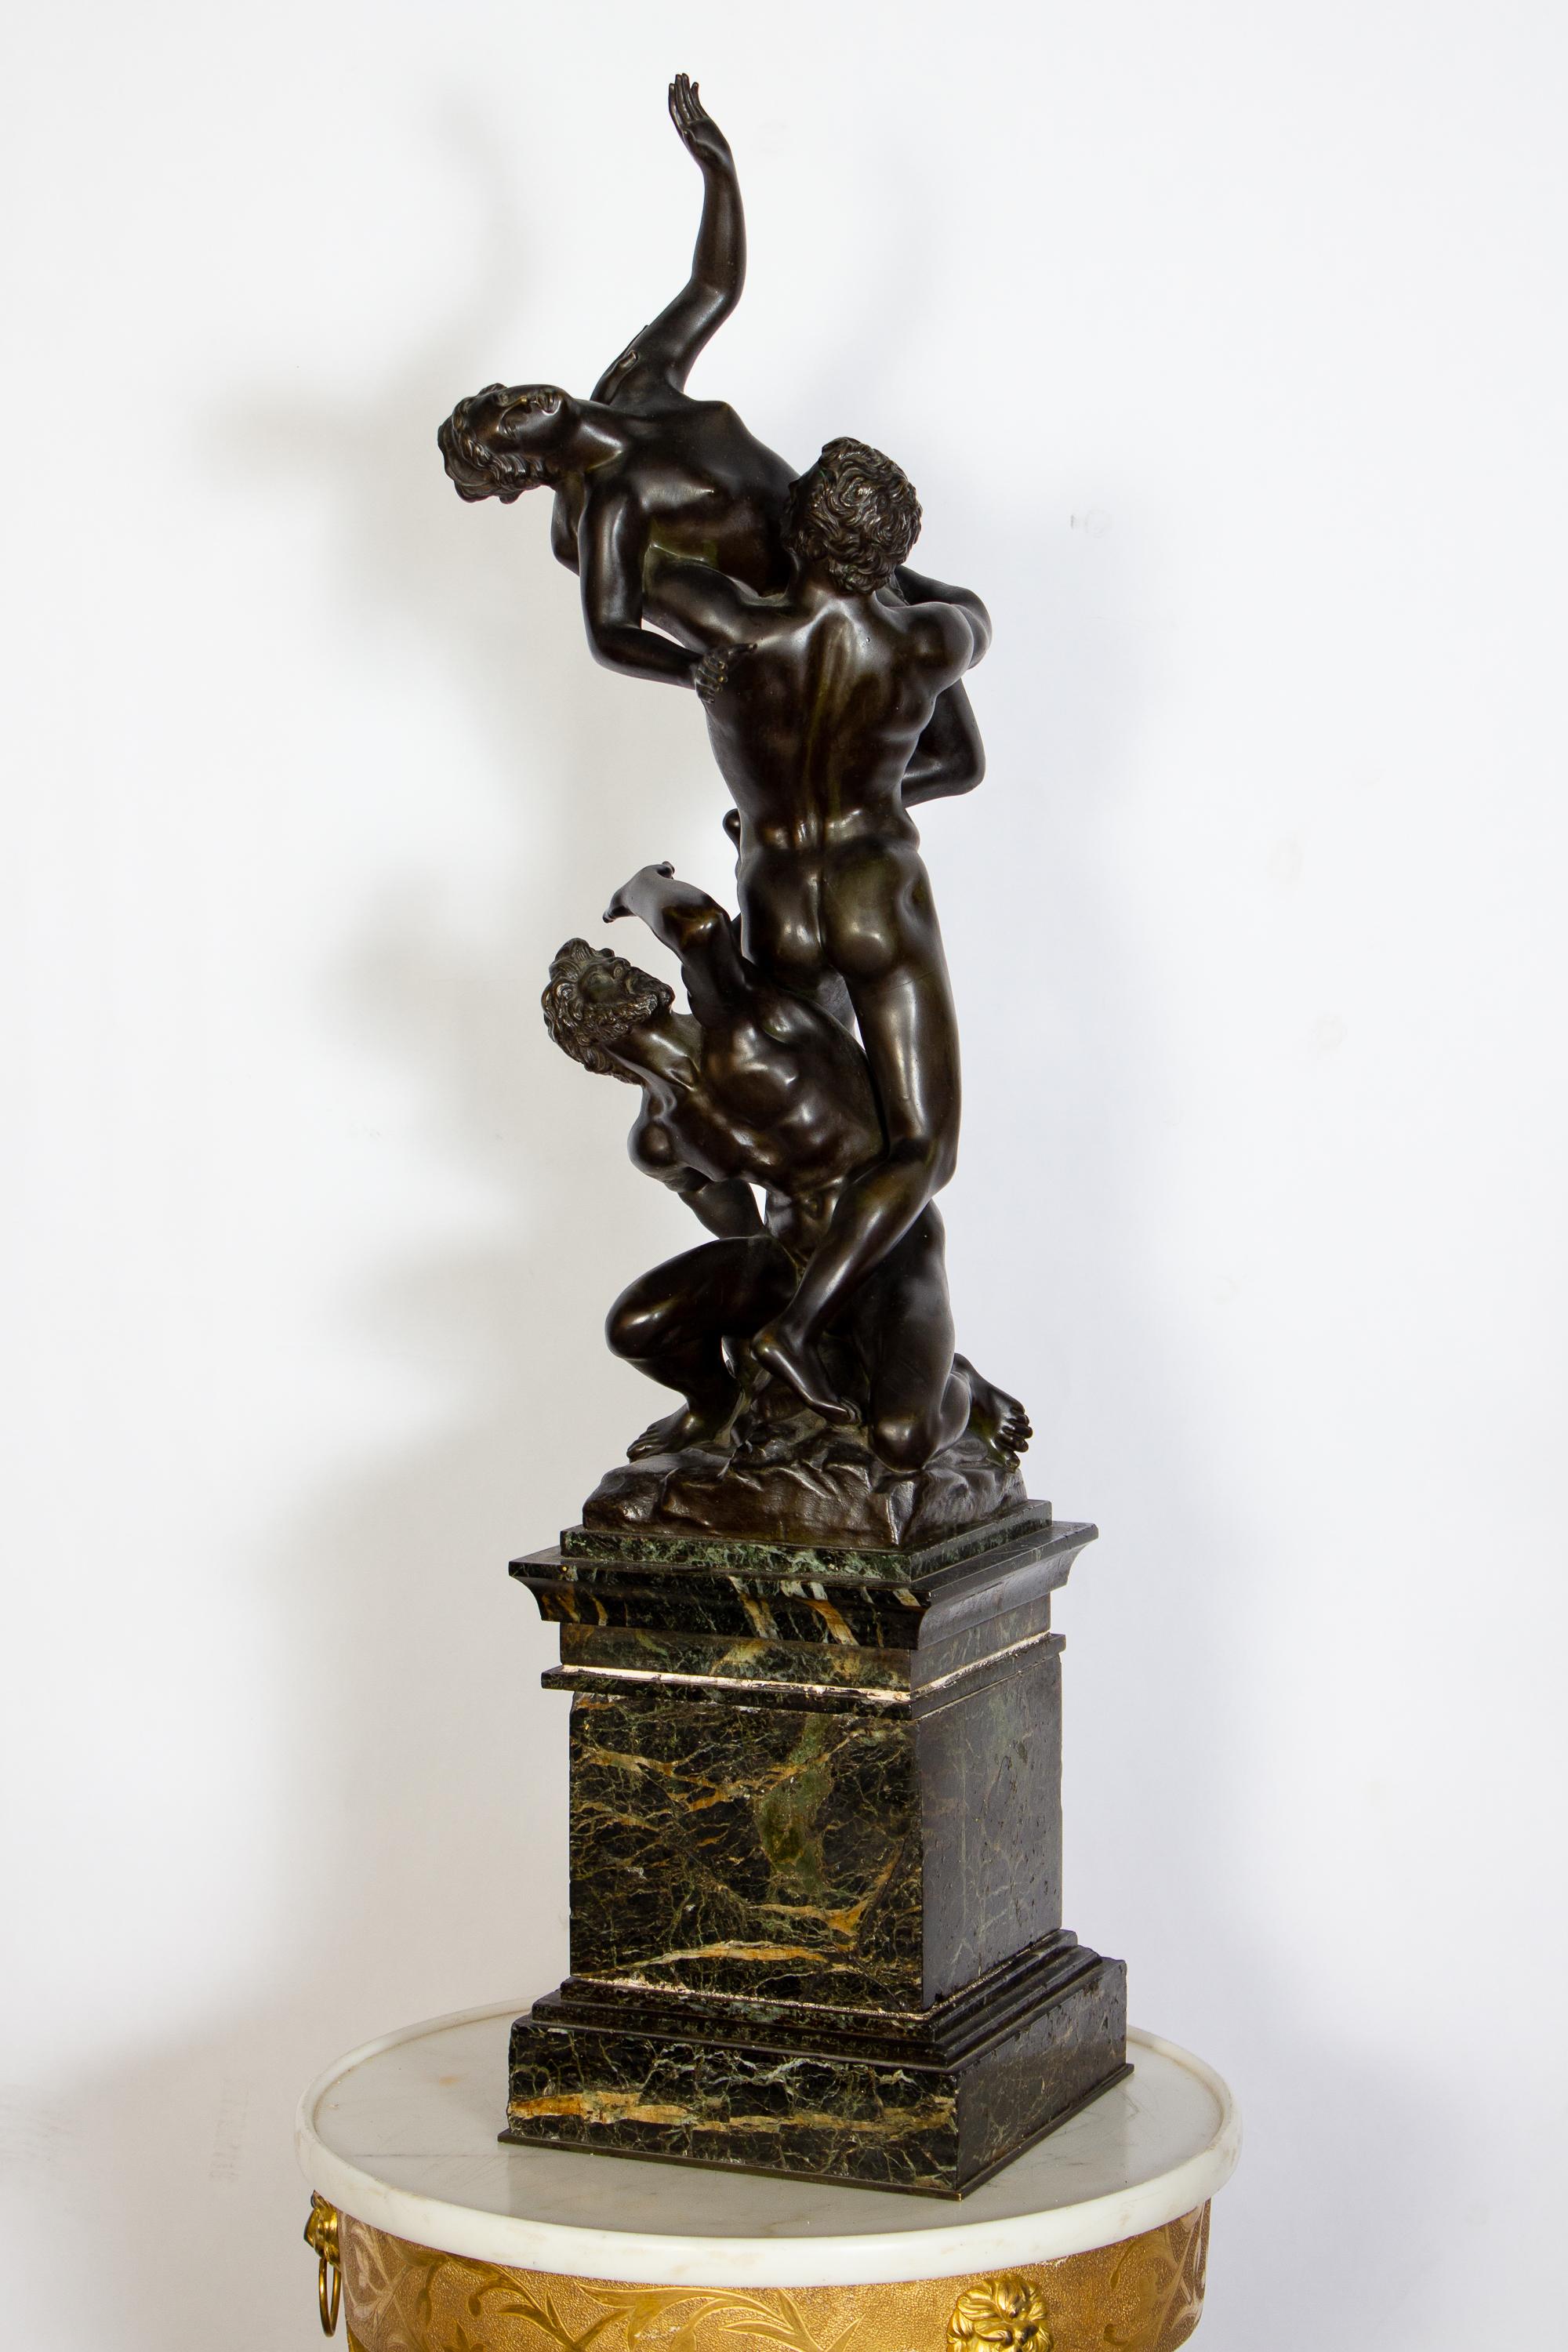 Fine Group of Sculptures in Bronze after  Jean de Boulogne (Giambologna)
The torturously twisting Rape of the Sabine Women  is one of the finest and most technically difficult sculptures in the world. Three intertwined bodies, two men and a woman,